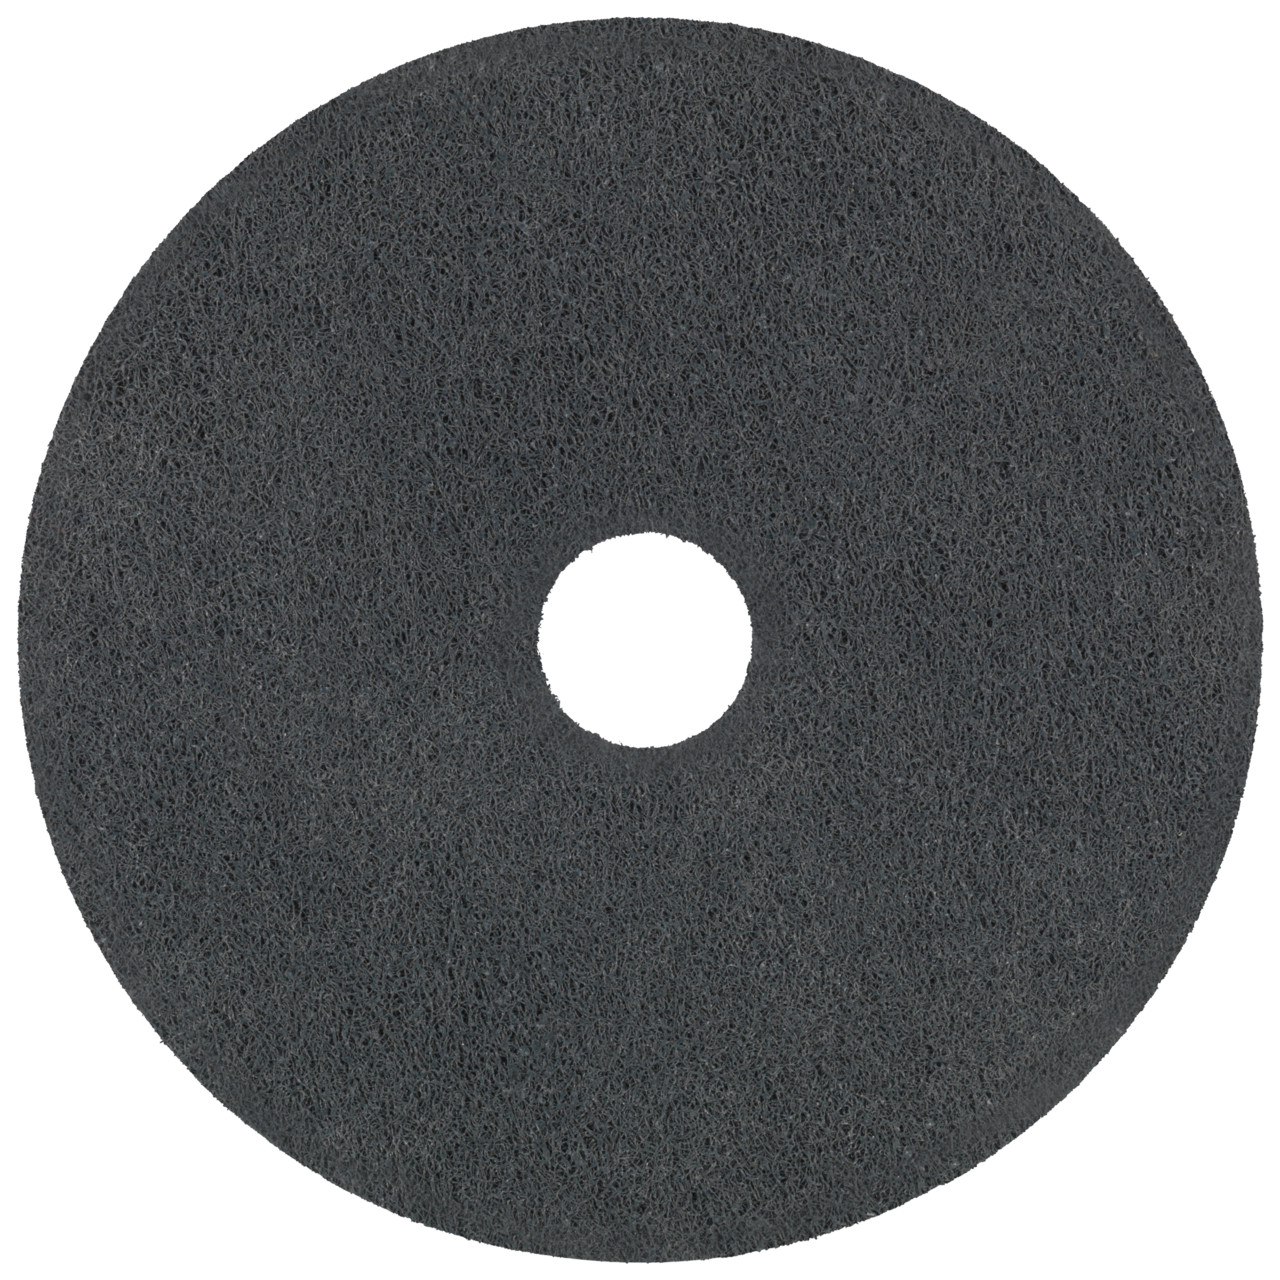 Tyrolit Pressed compact discs DxDxH 152x3x25.4 Universally applicable, 6 C FEIN, shape: 1, Art. 34190210